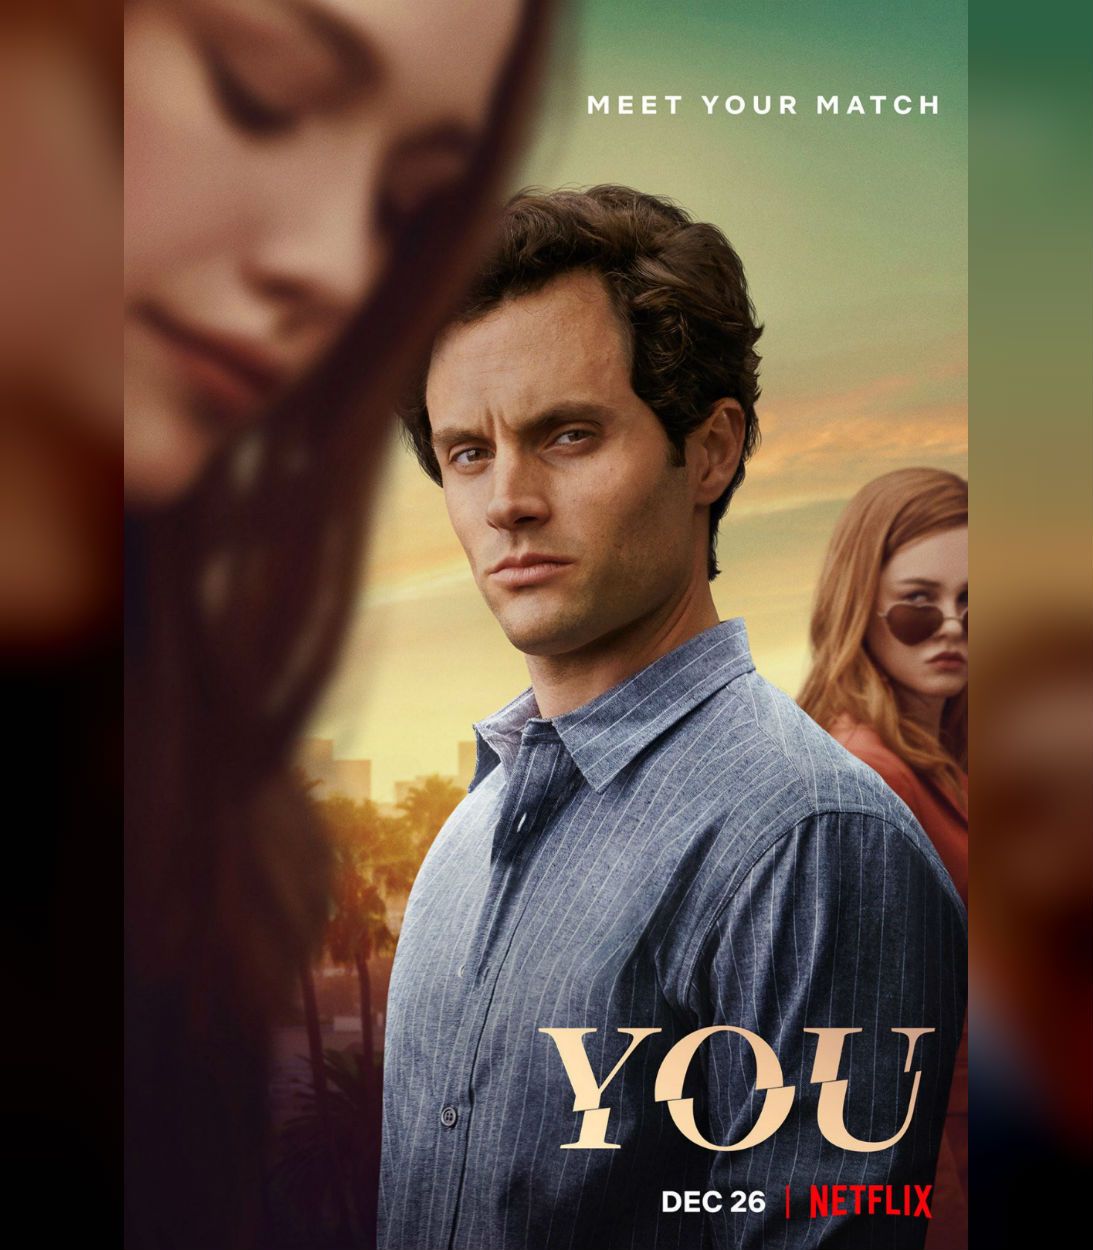 Netflix releases the YOU season 2 poster